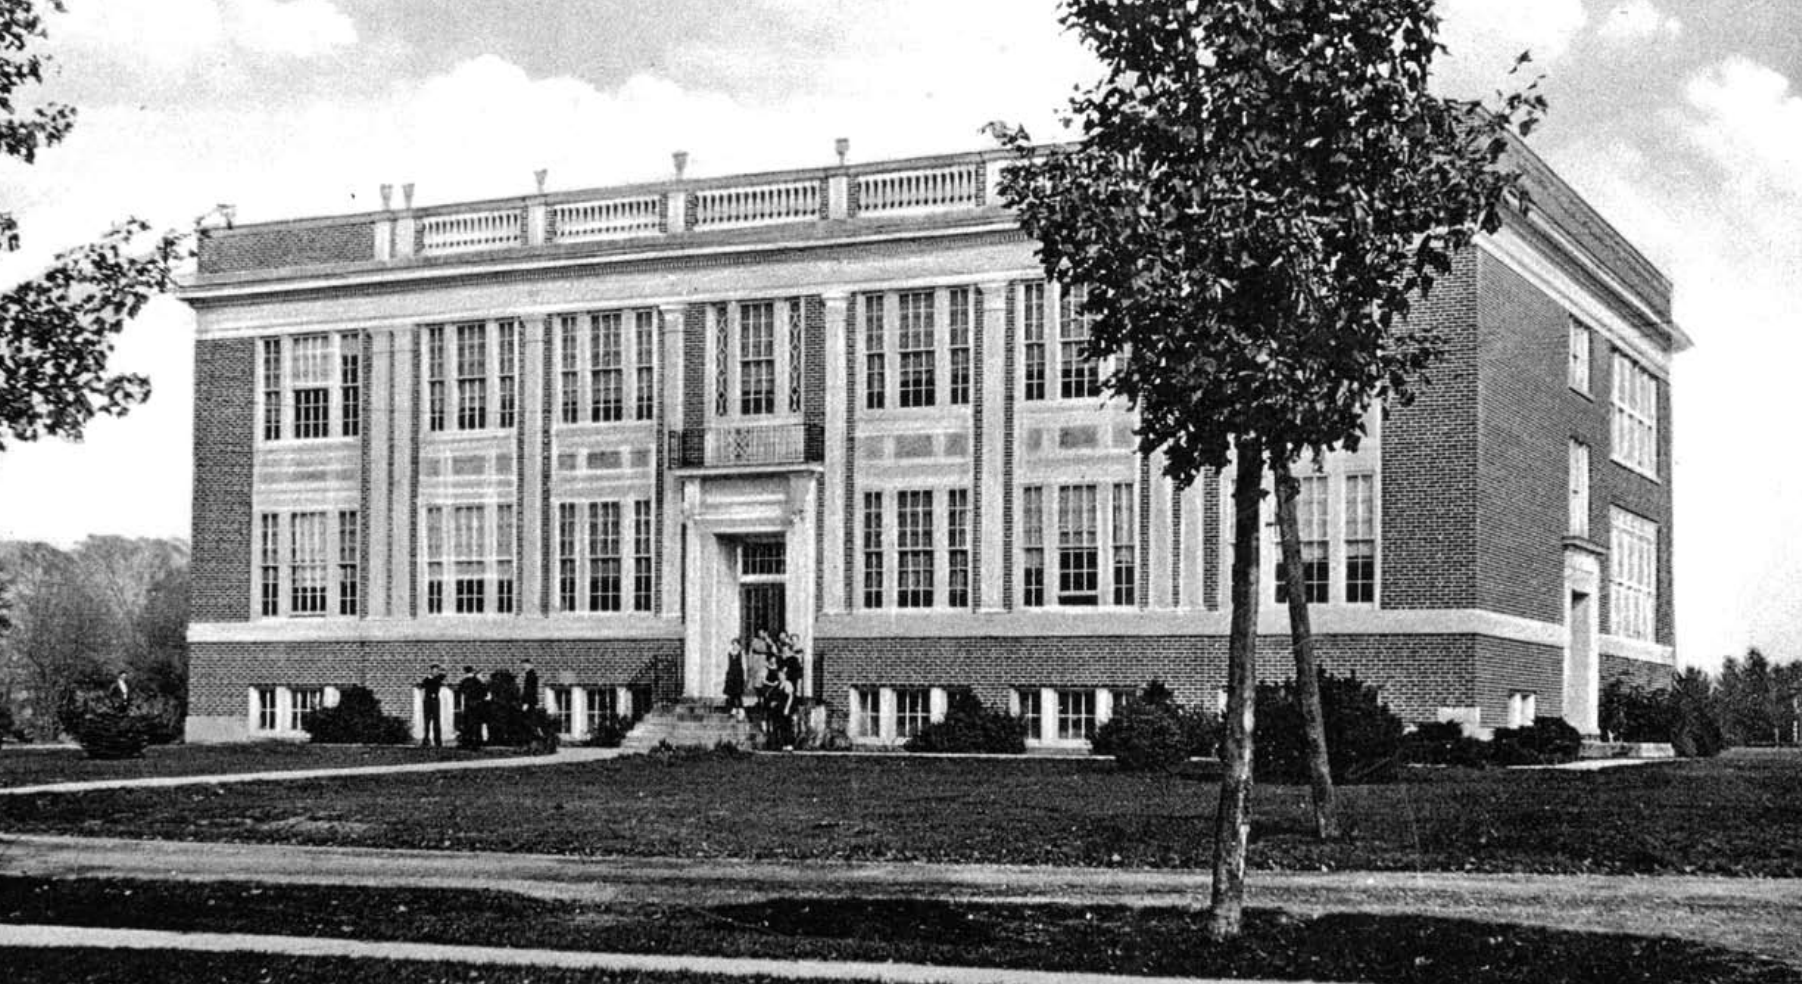 Uxbridge Secondary School which opened in April 1924.